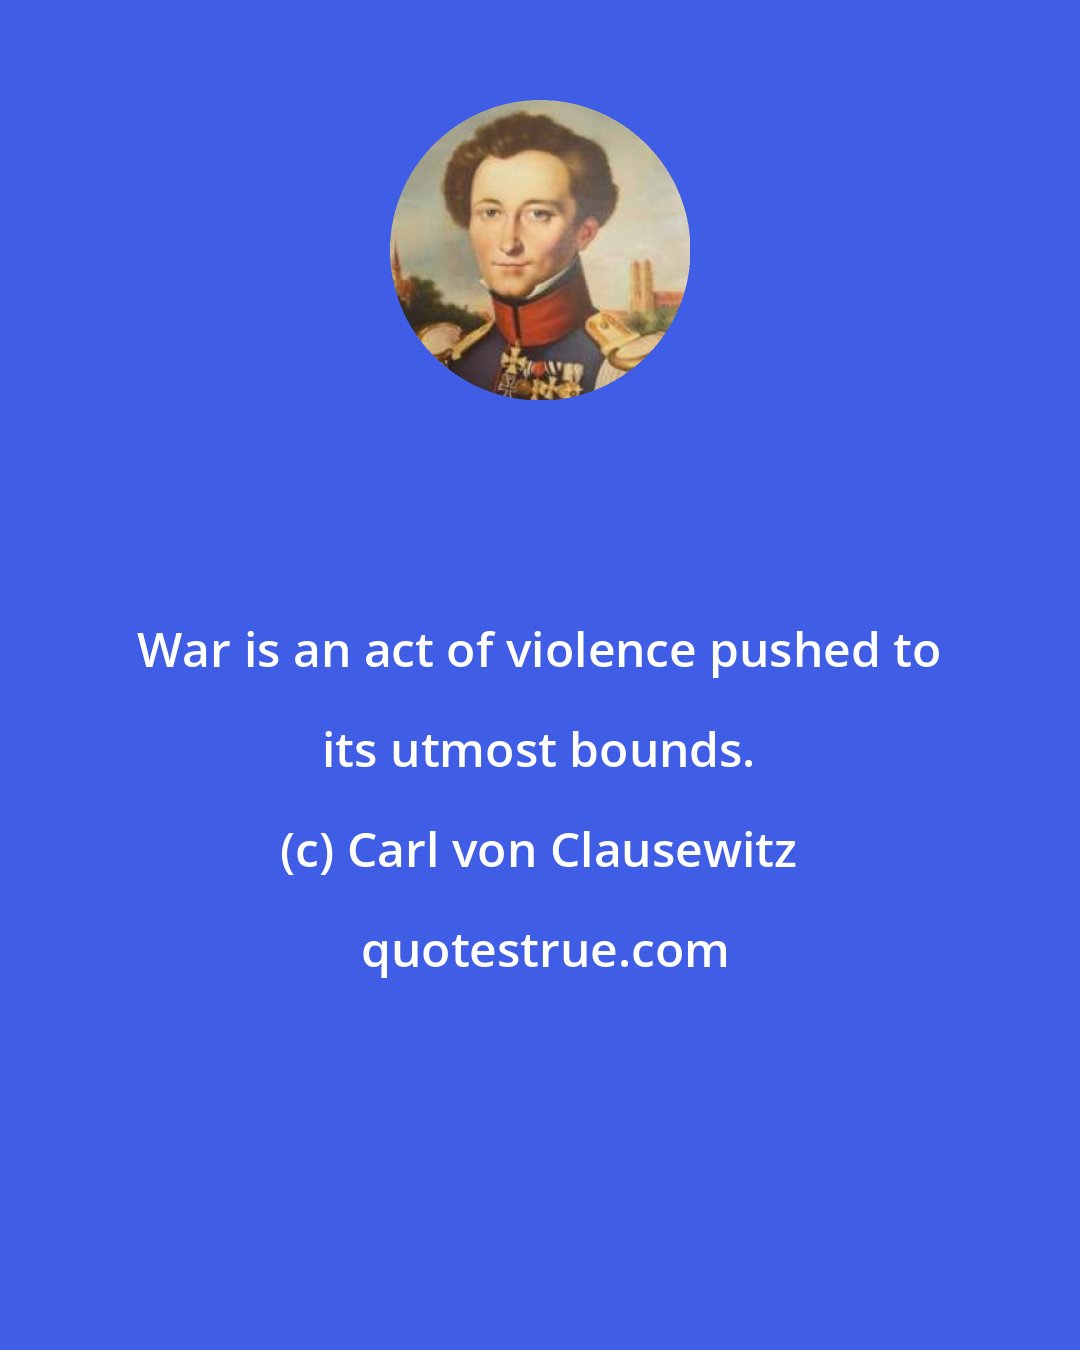 Carl von Clausewitz: War is an act of violence pushed to its utmost bounds.